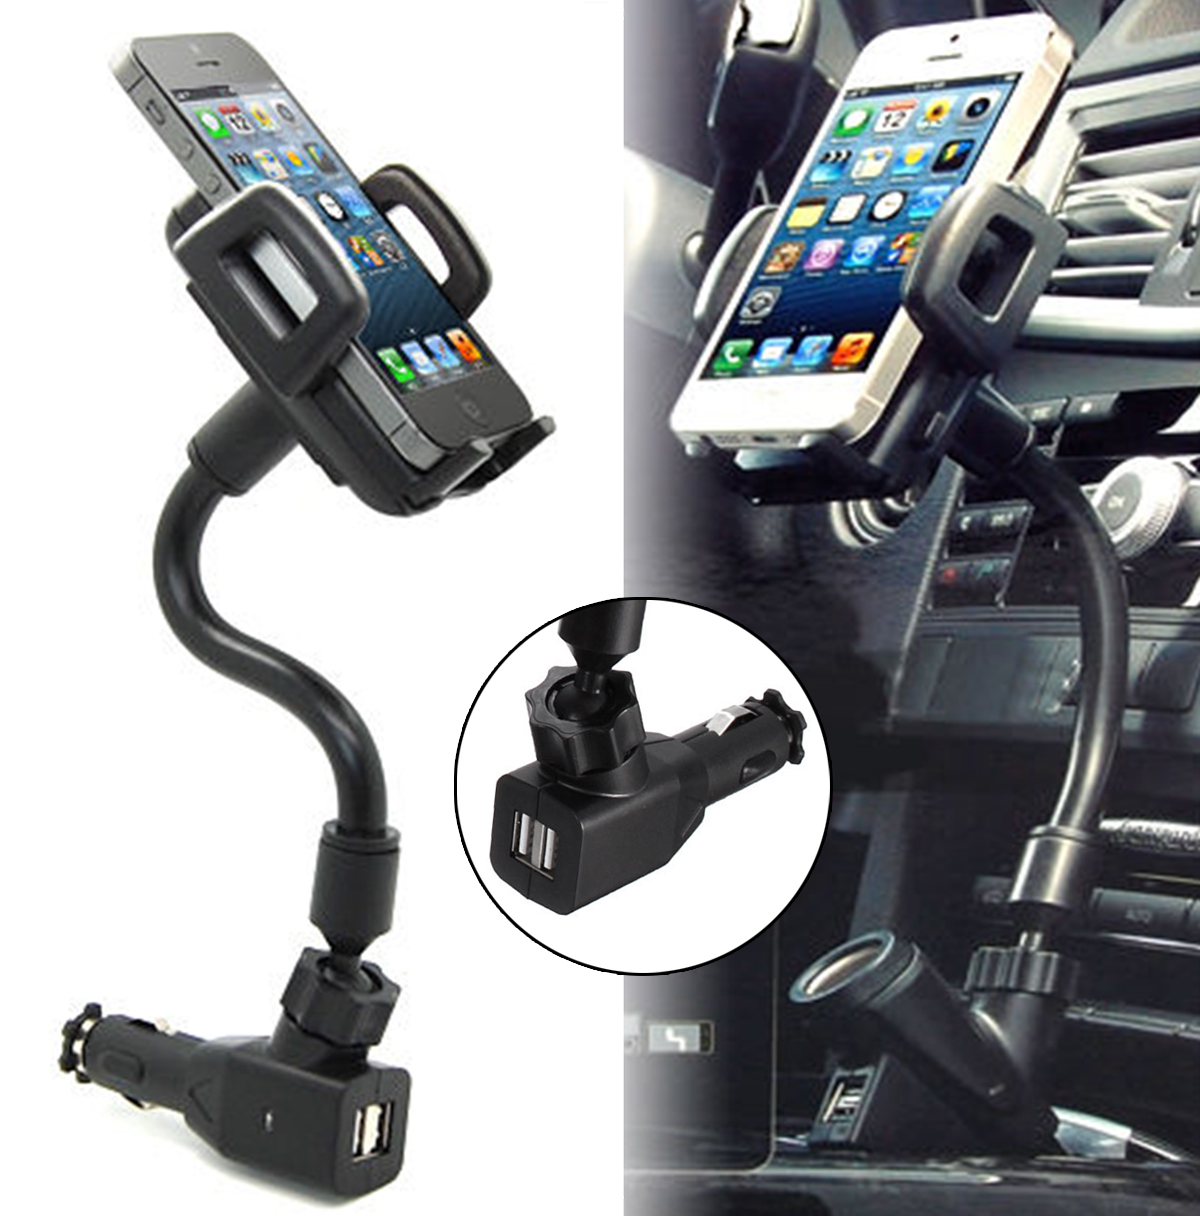 

2 USB Ports Car Charger Stand Mount Holder For iPhone 5 5S 5C